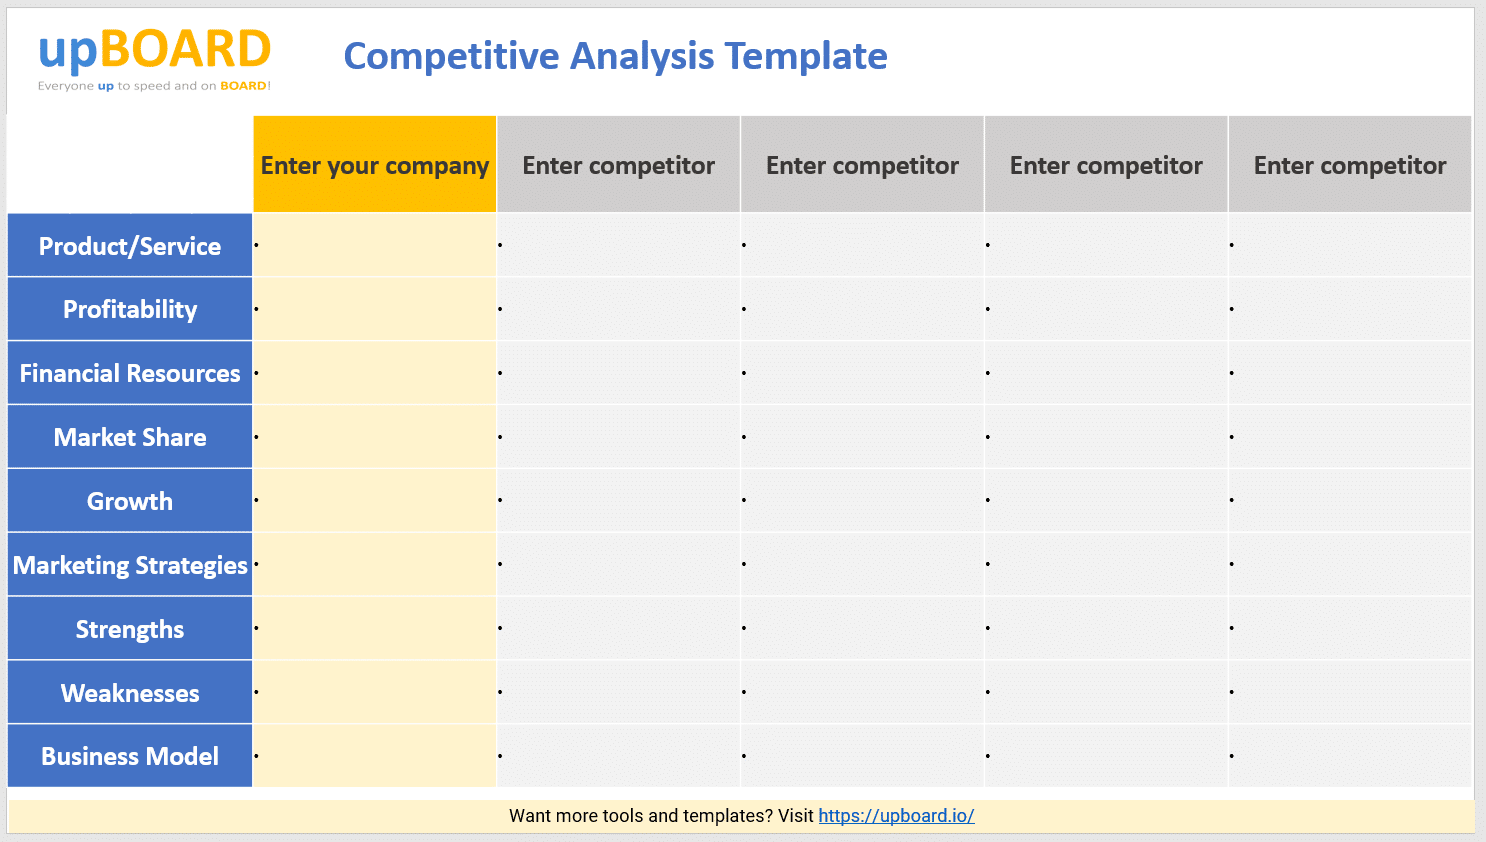 Competitive Analysis Online Tools, Templates & Software Throughout Capability Gap Analysis Template Regarding Capability Gap Analysis Template